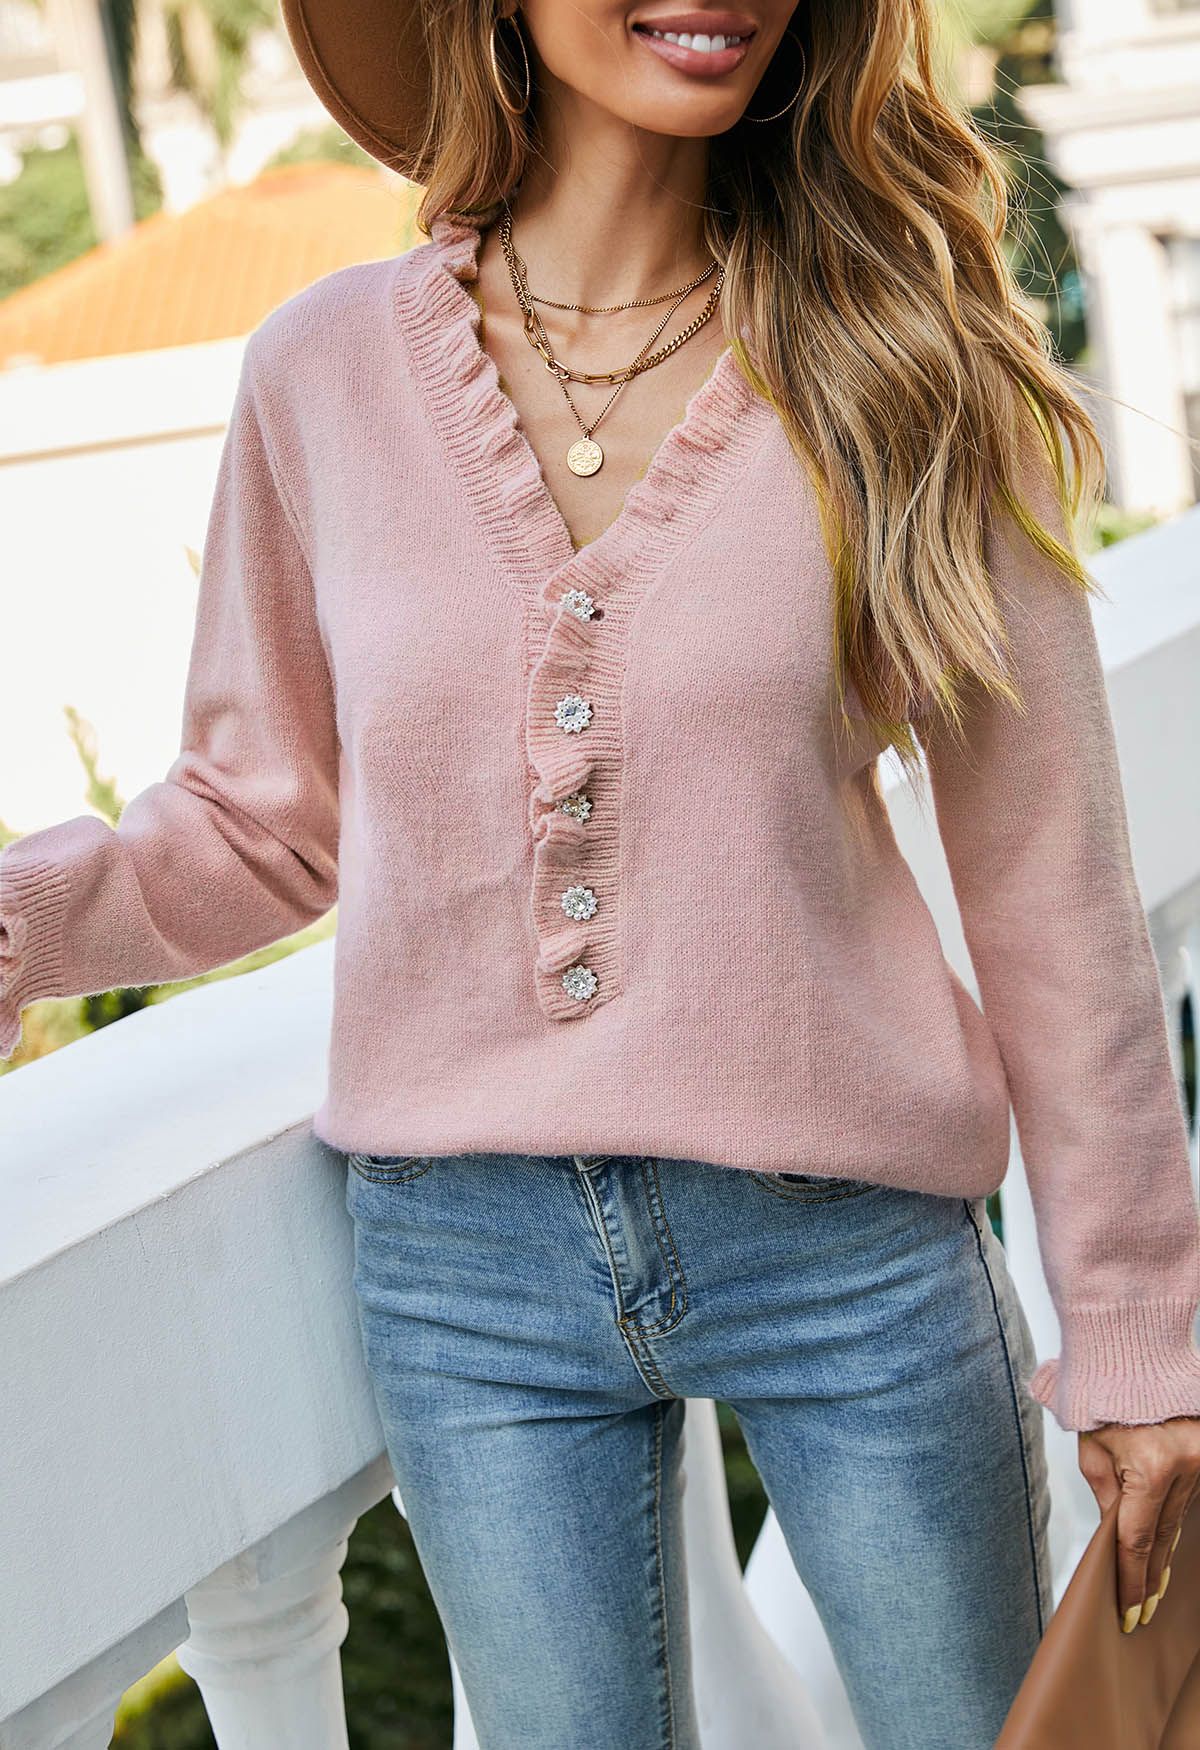 Ruffle Edge Button Front Knit Sweater in Pink - Retro, Indie and